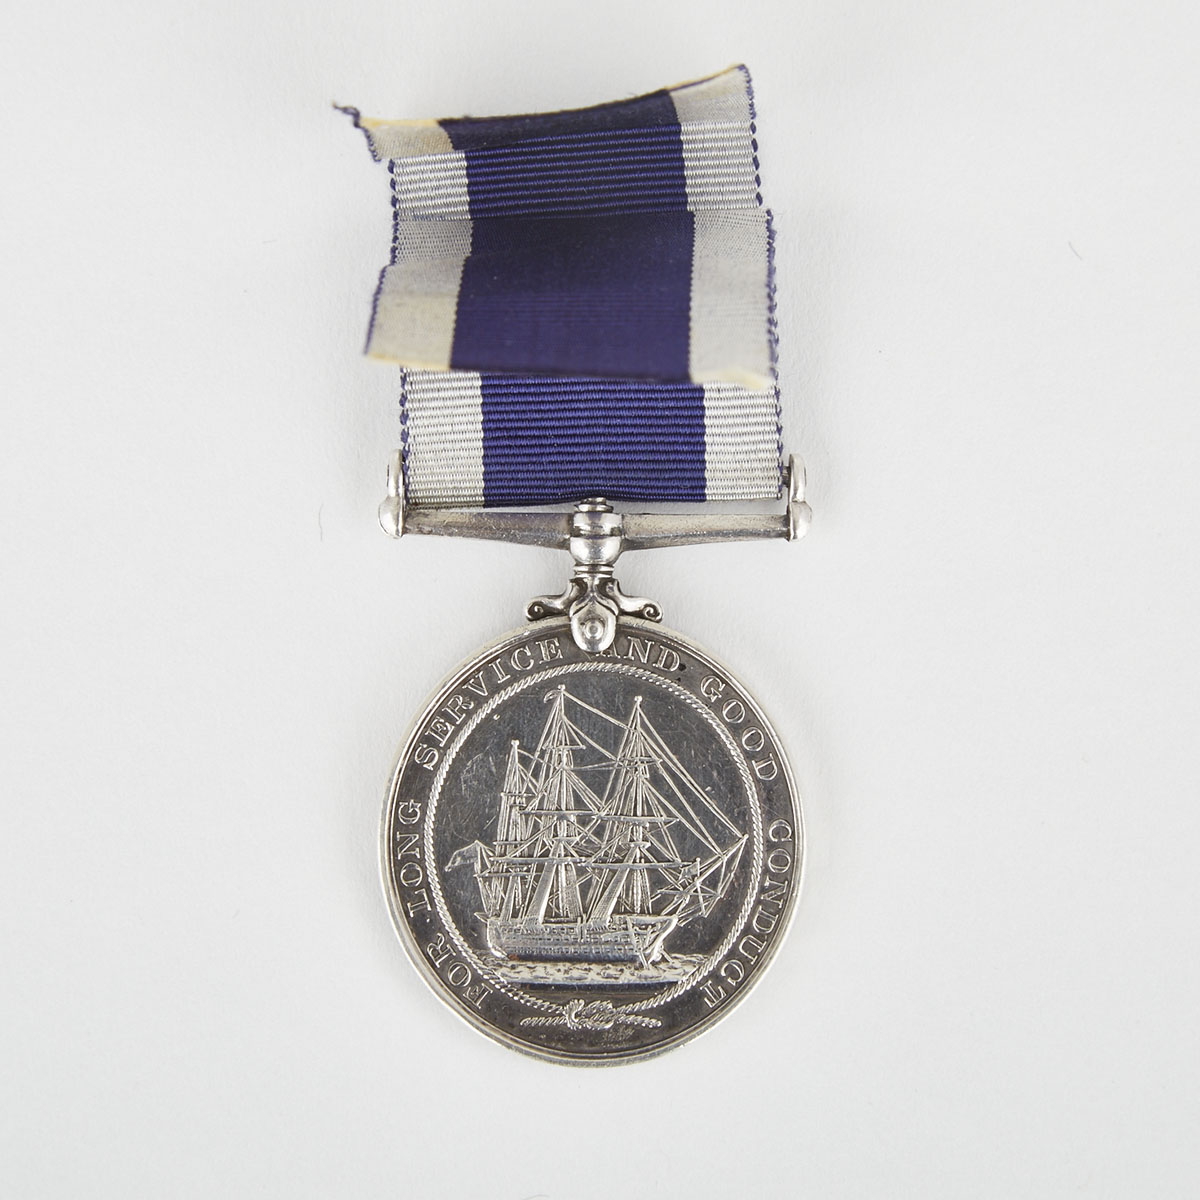 George V Long Service and Good Conduct Medal to Leading Signalman Harry William Newton, 222696, H.M.S. Apollo